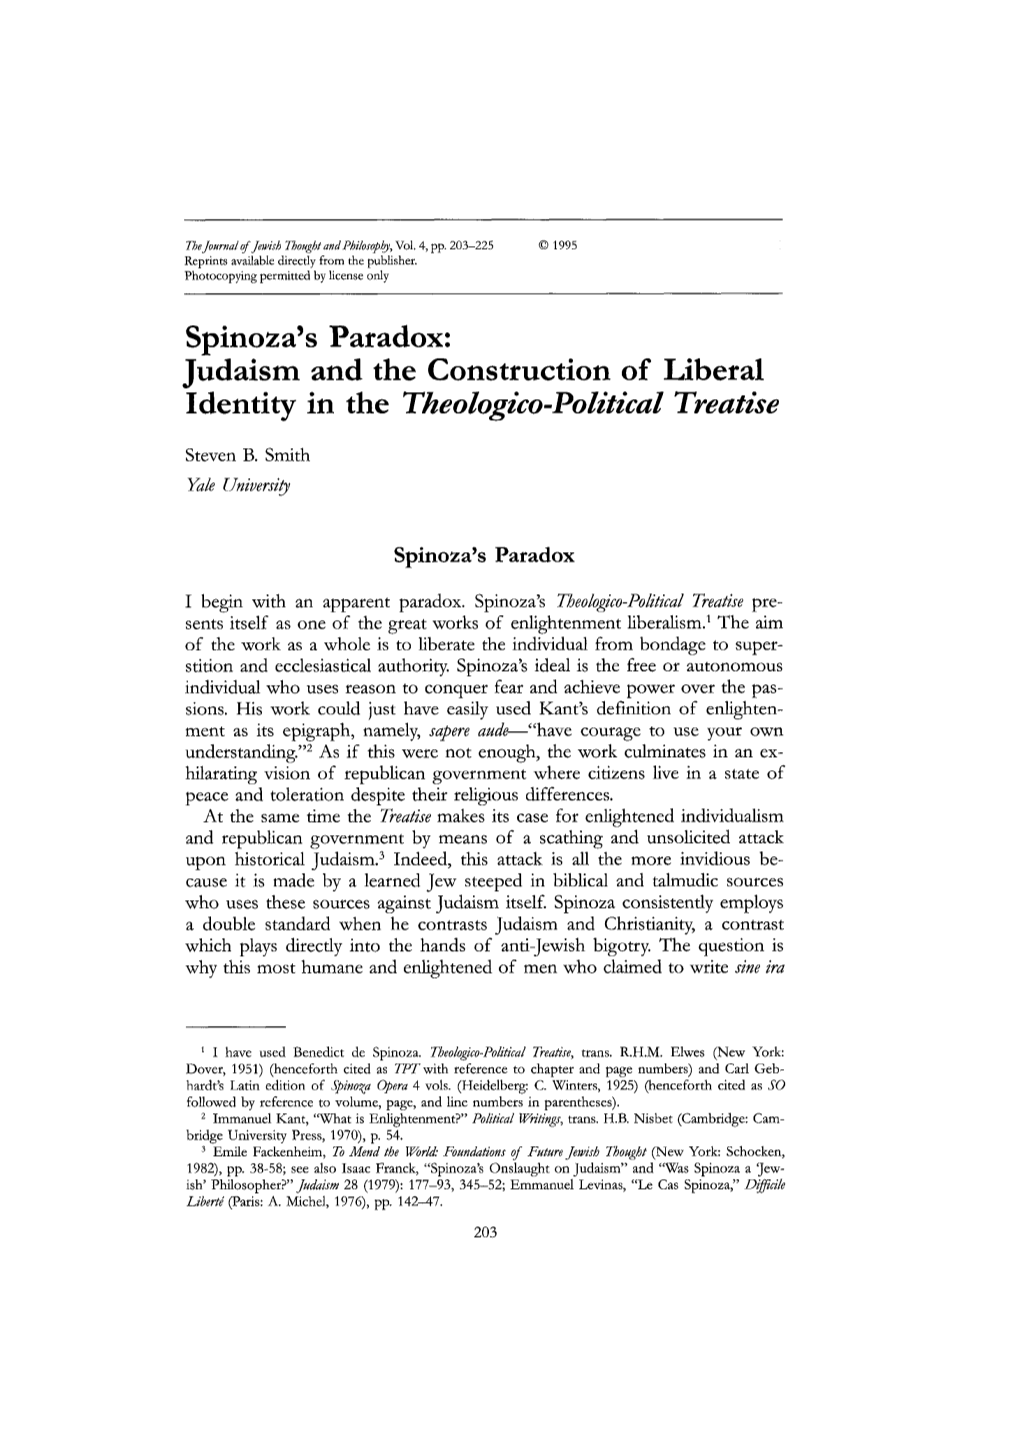 Spinoza's Paradox: Judaism and the Construction of Liberal Identity in the Theologico-Political Treatise